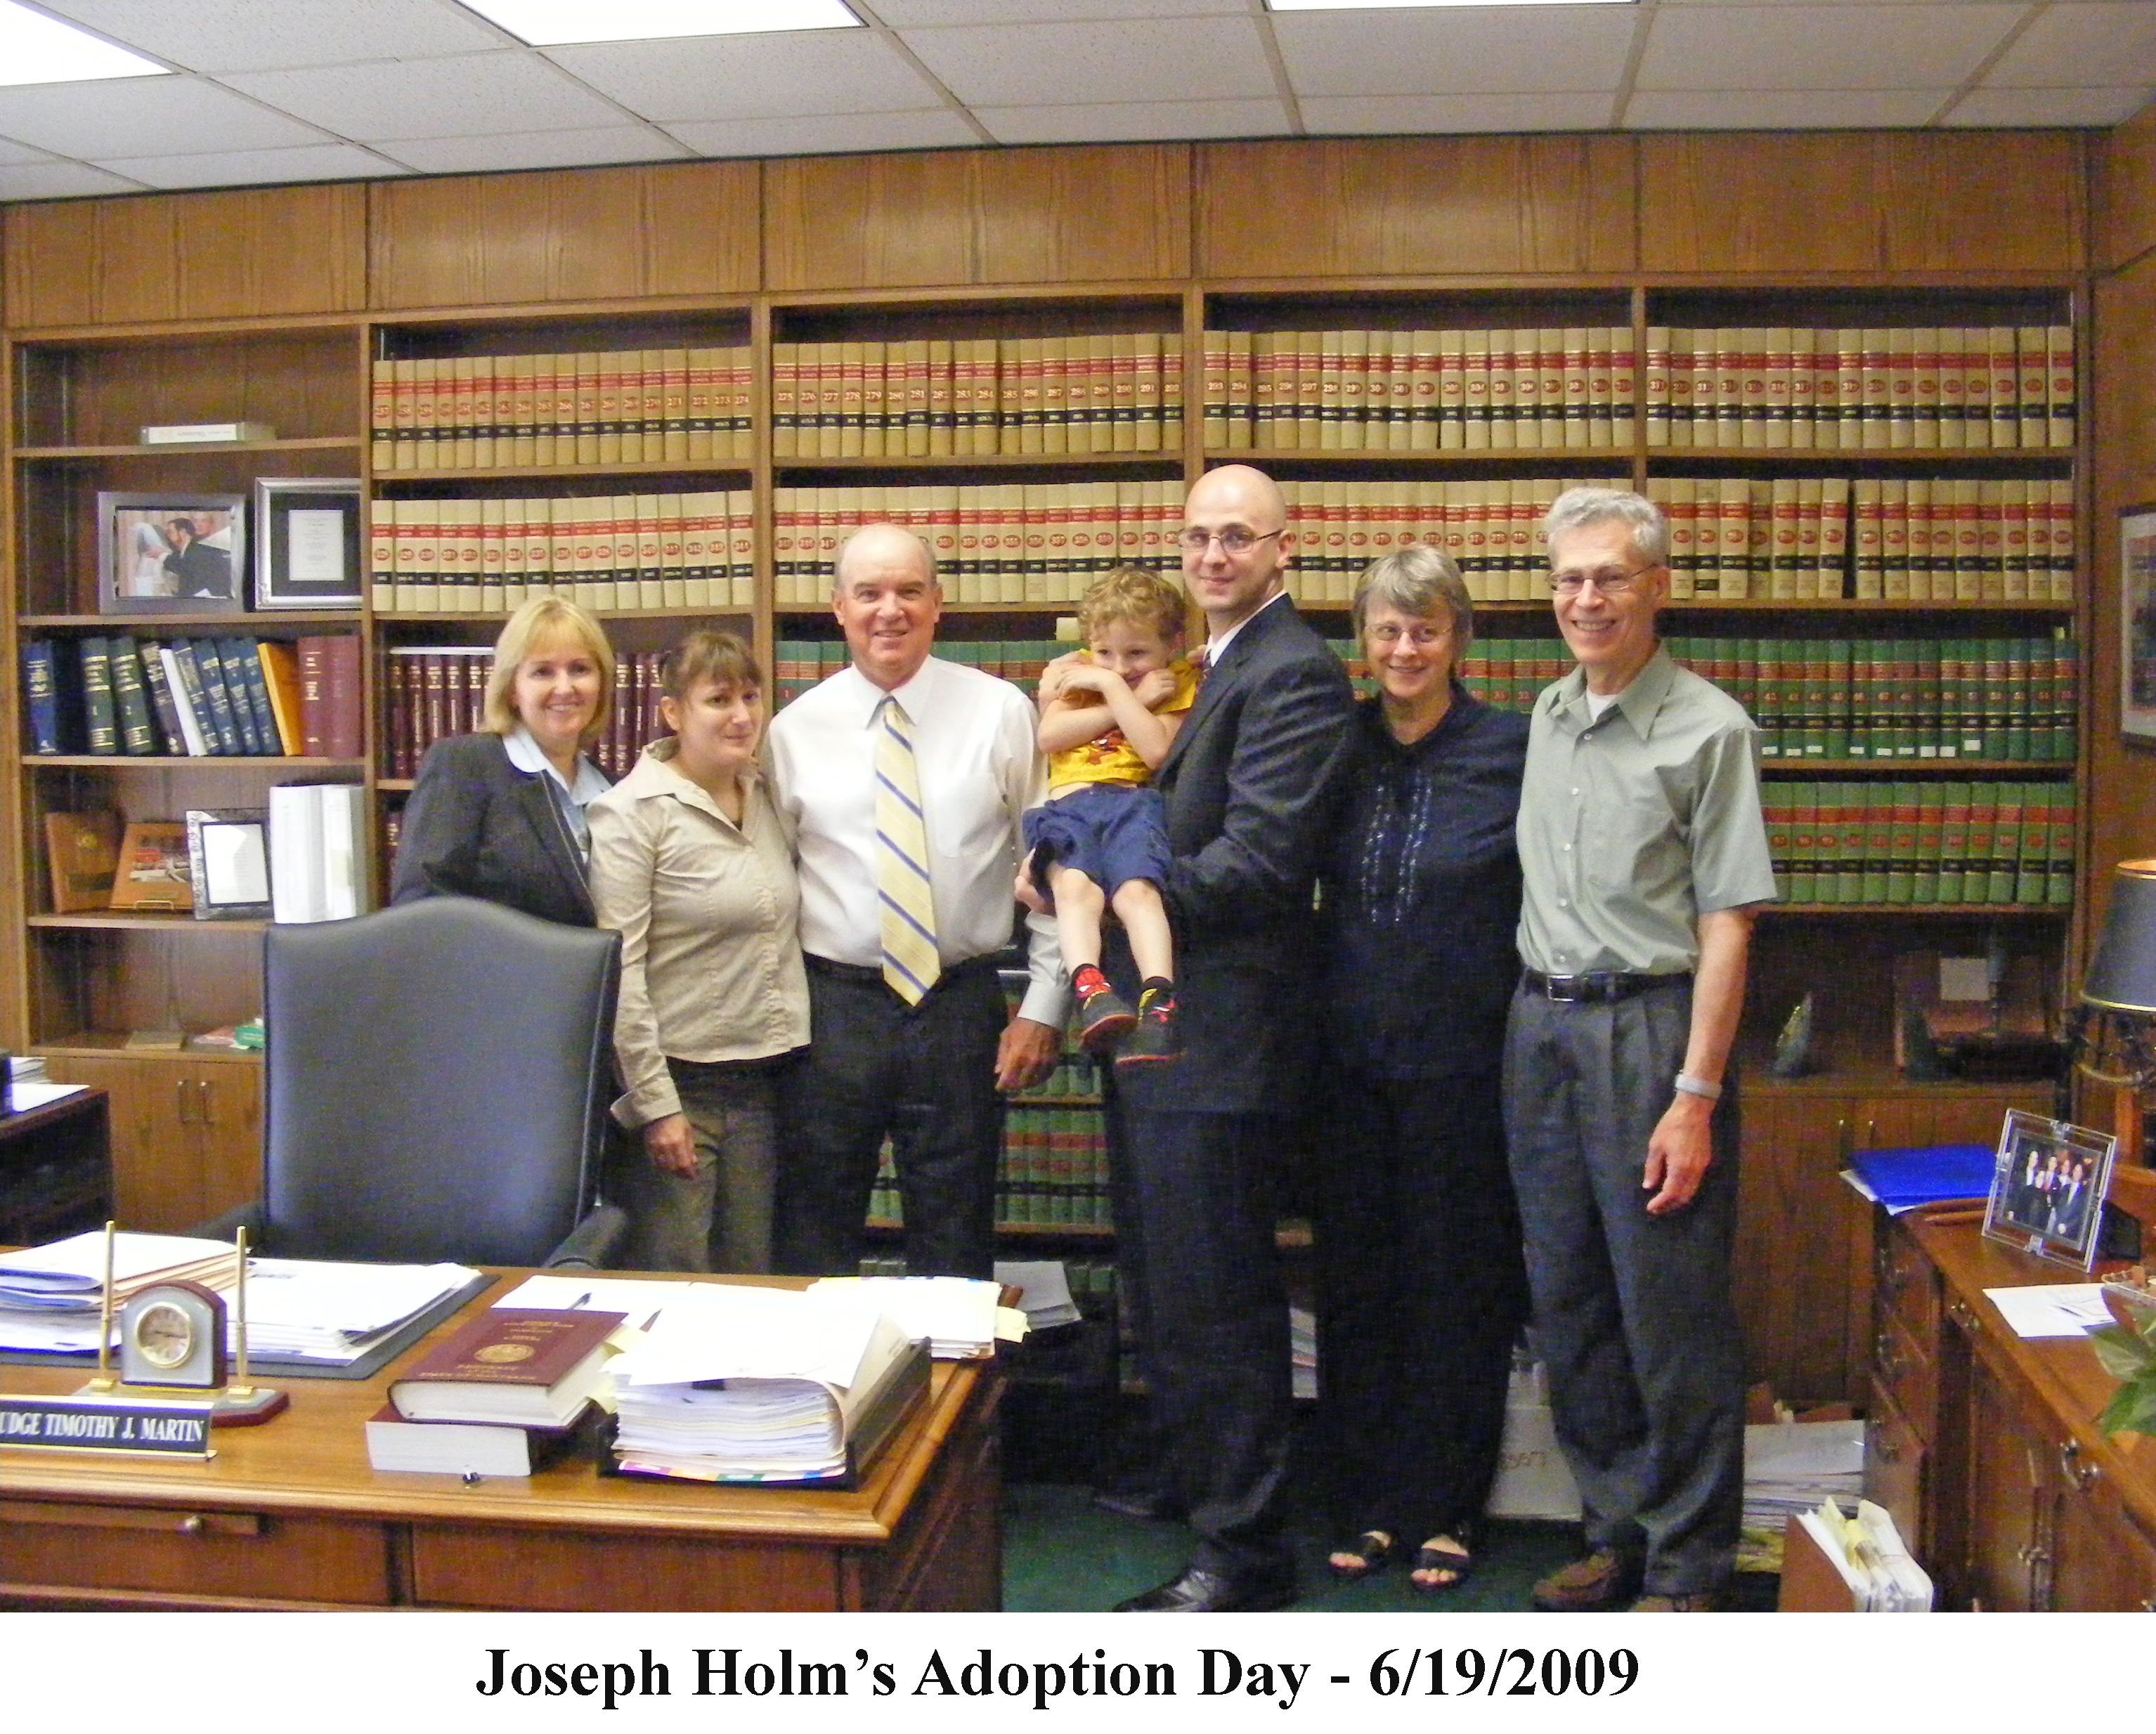 A family photo in the chambers of the presiding judge